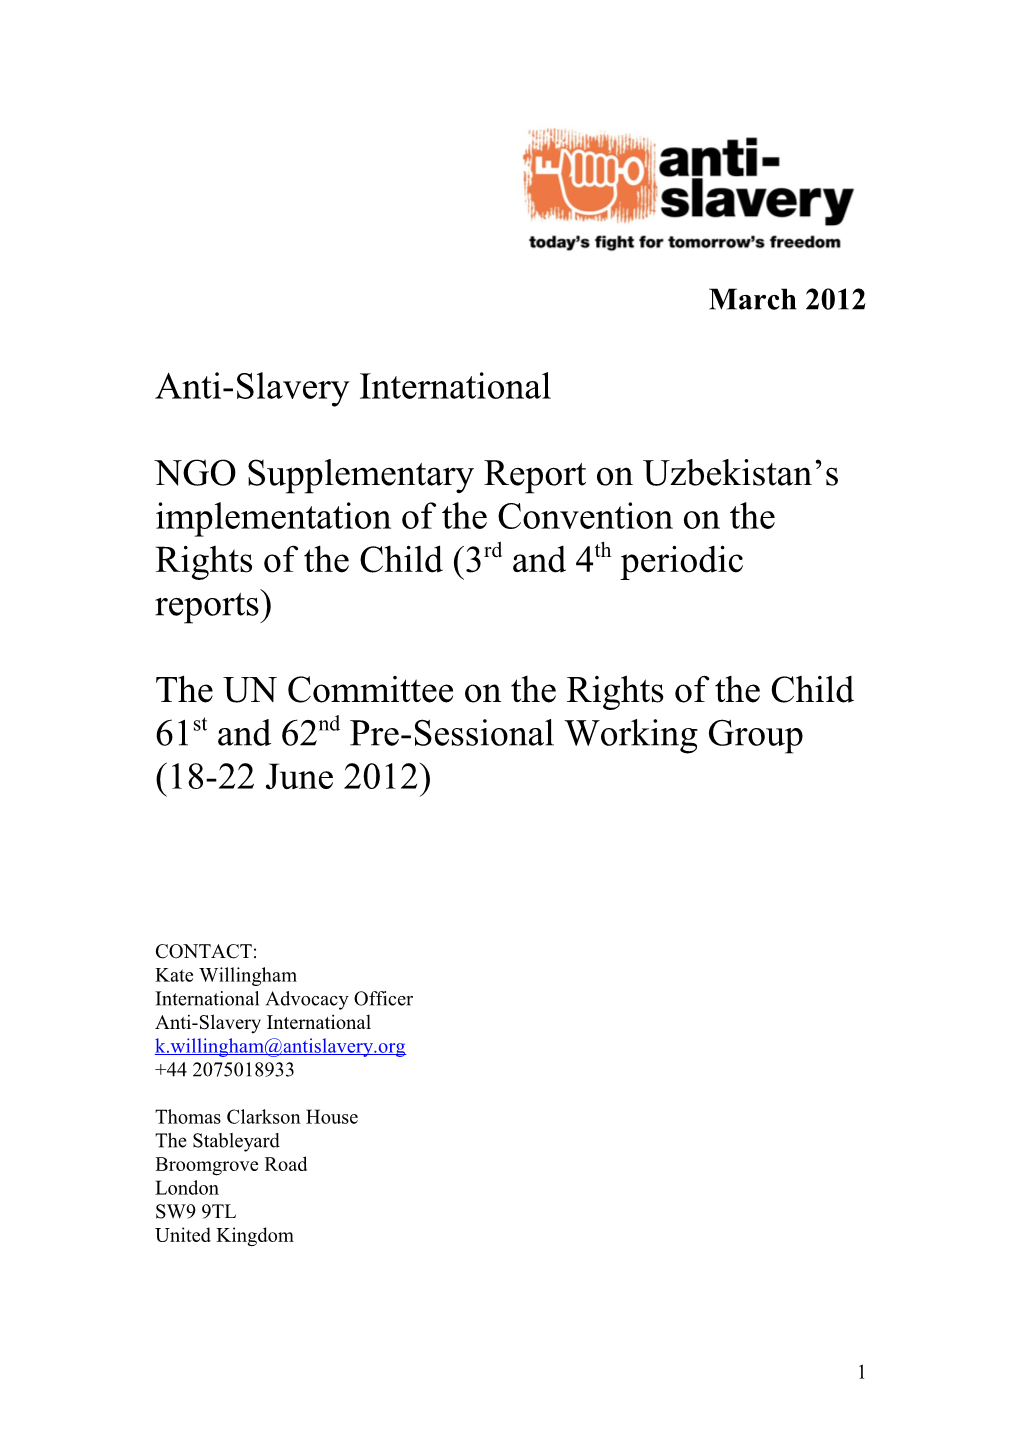 Anti-Slavery International Submission to the UN Committee on the Rights of the Child Uzbekistan